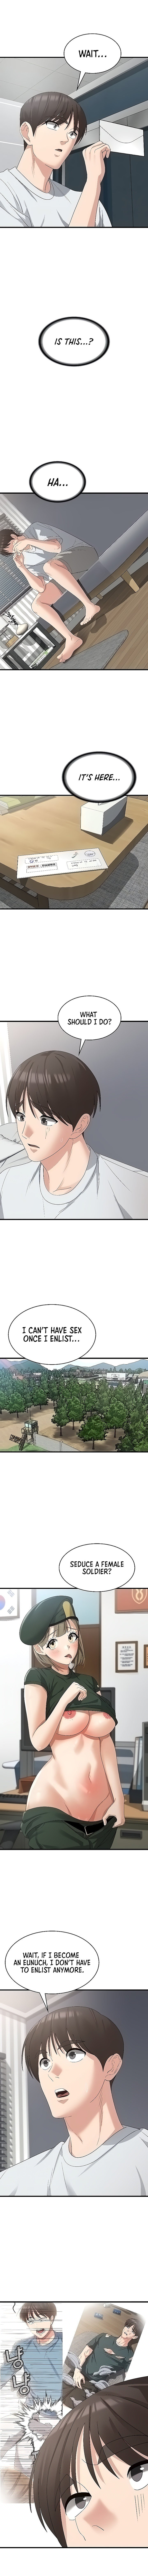 sexy-man-and-woman-chap-39-5